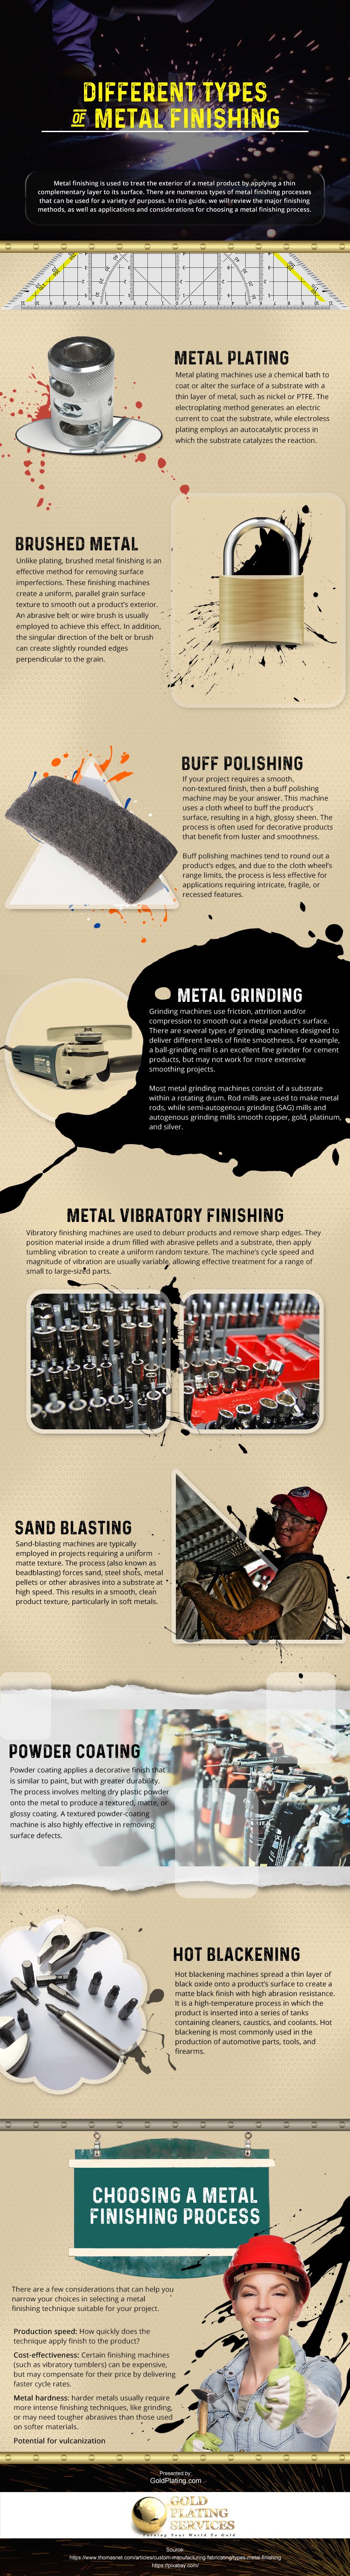 Different-Types-of-Metal-Finishing Infographic